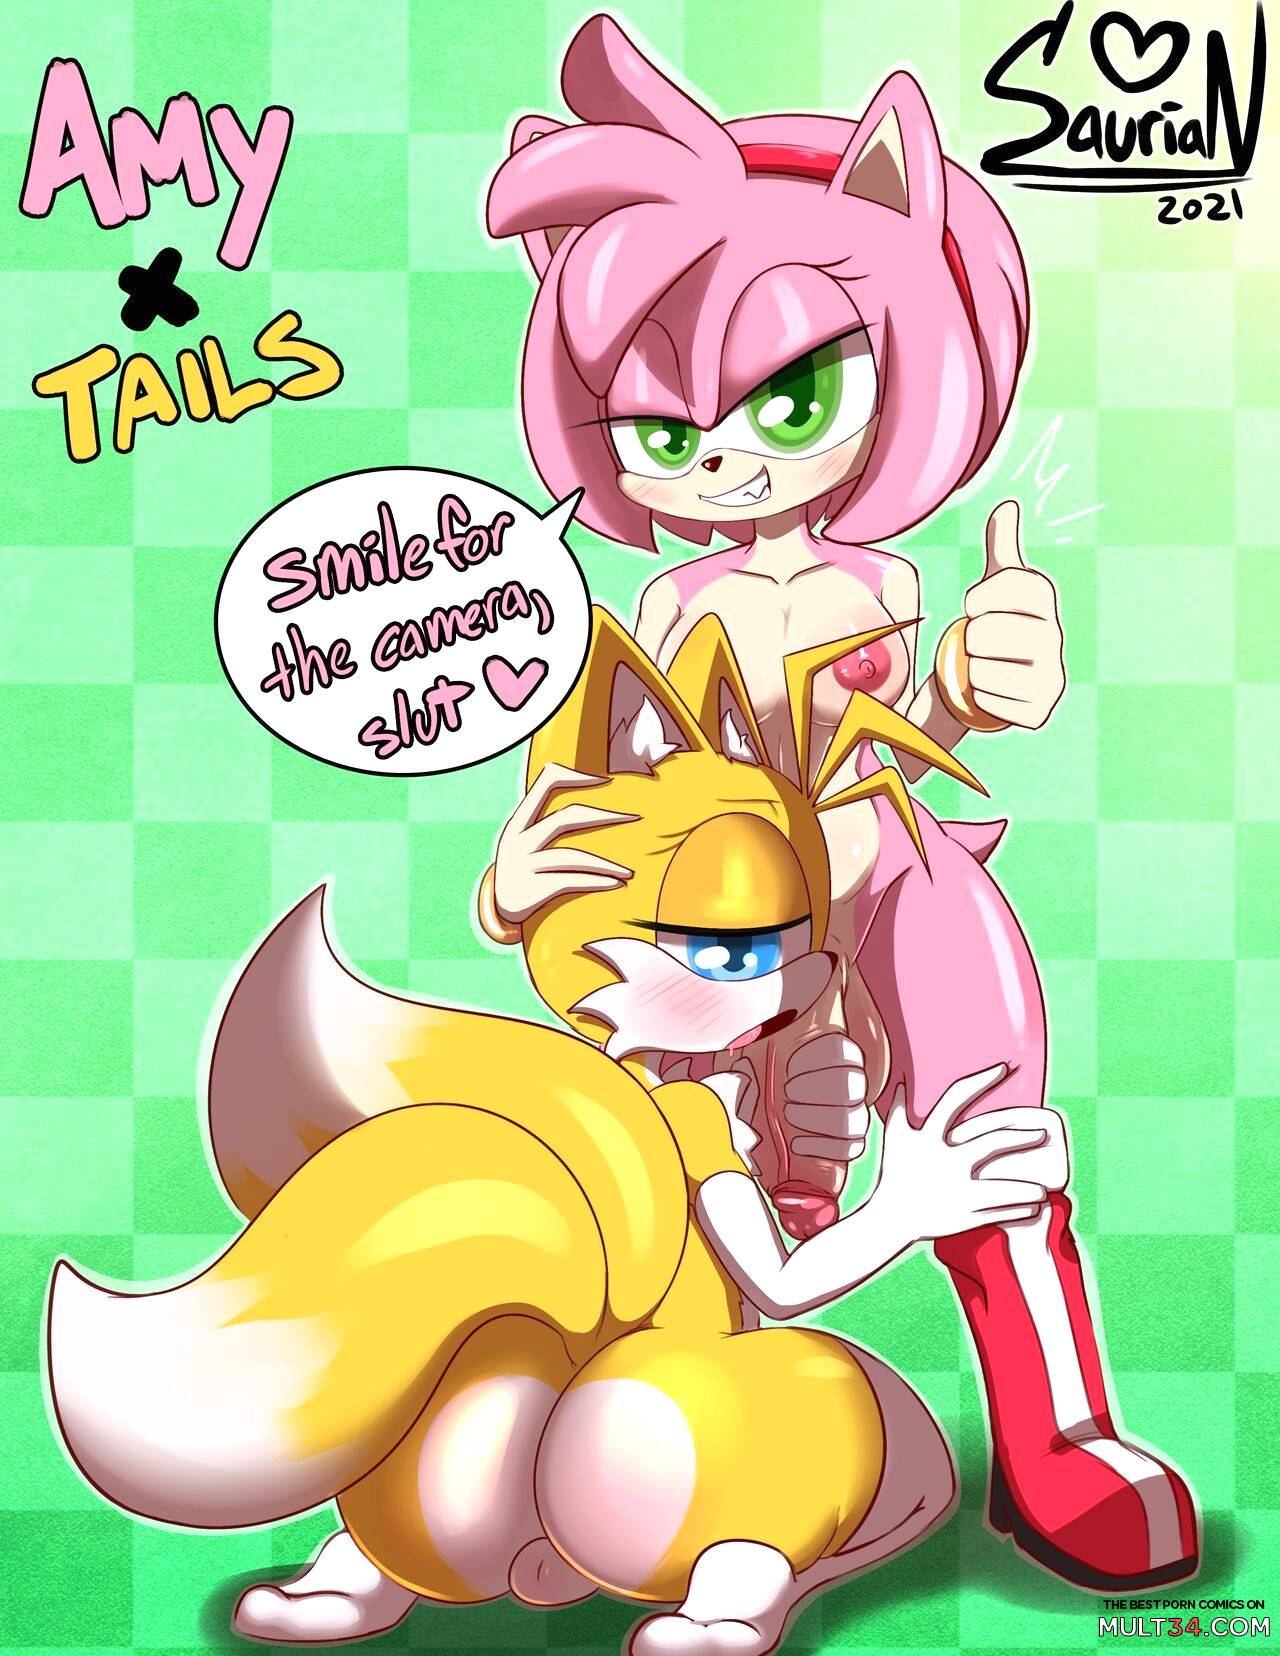 Tails and amy porn comics